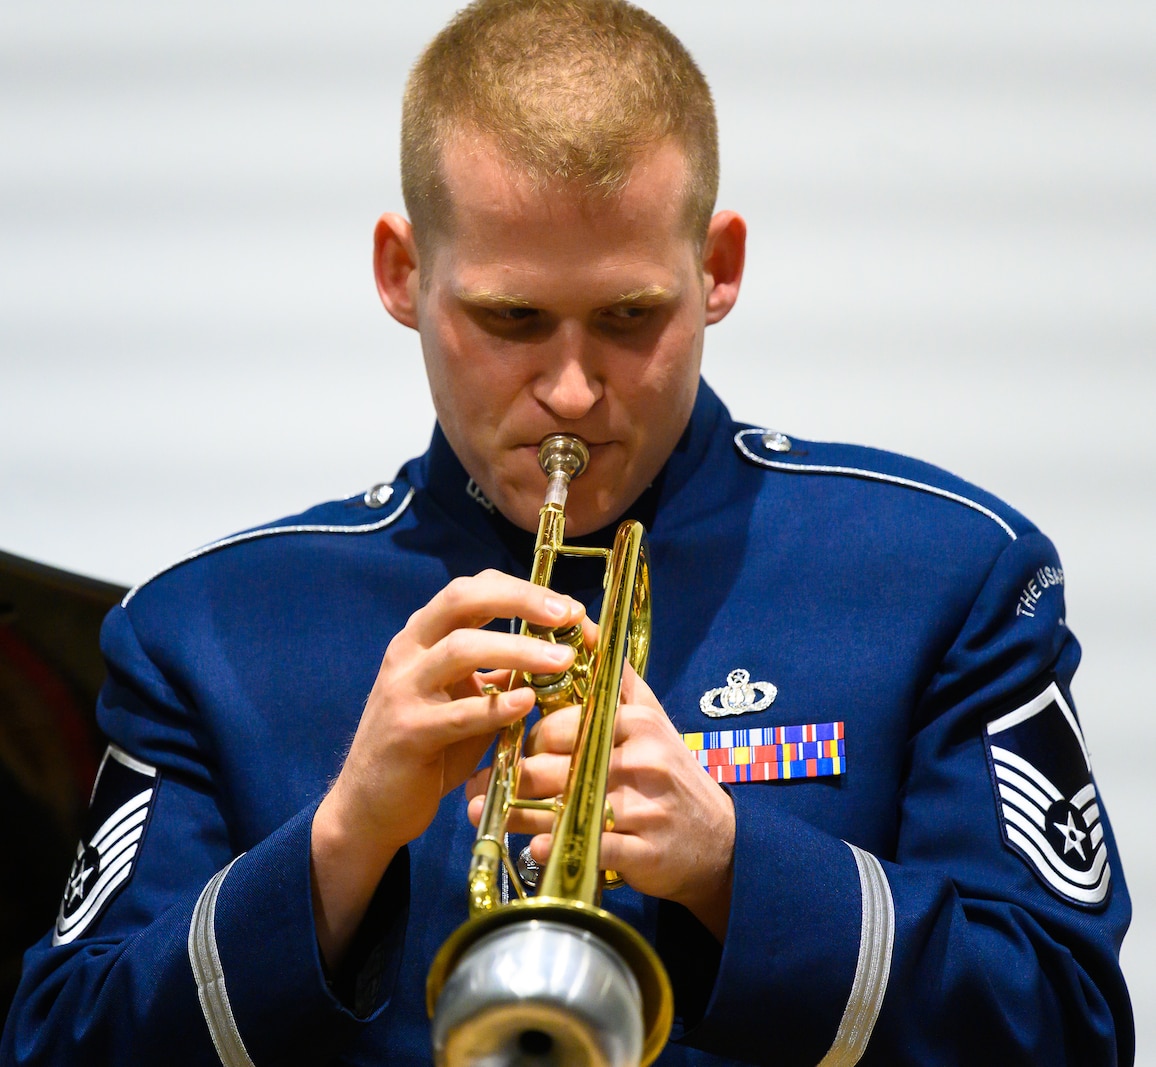 An Air Force trumpeter performs a solo using with a silver mute. He is wearing dark blue Air Force uniform against a white wall.